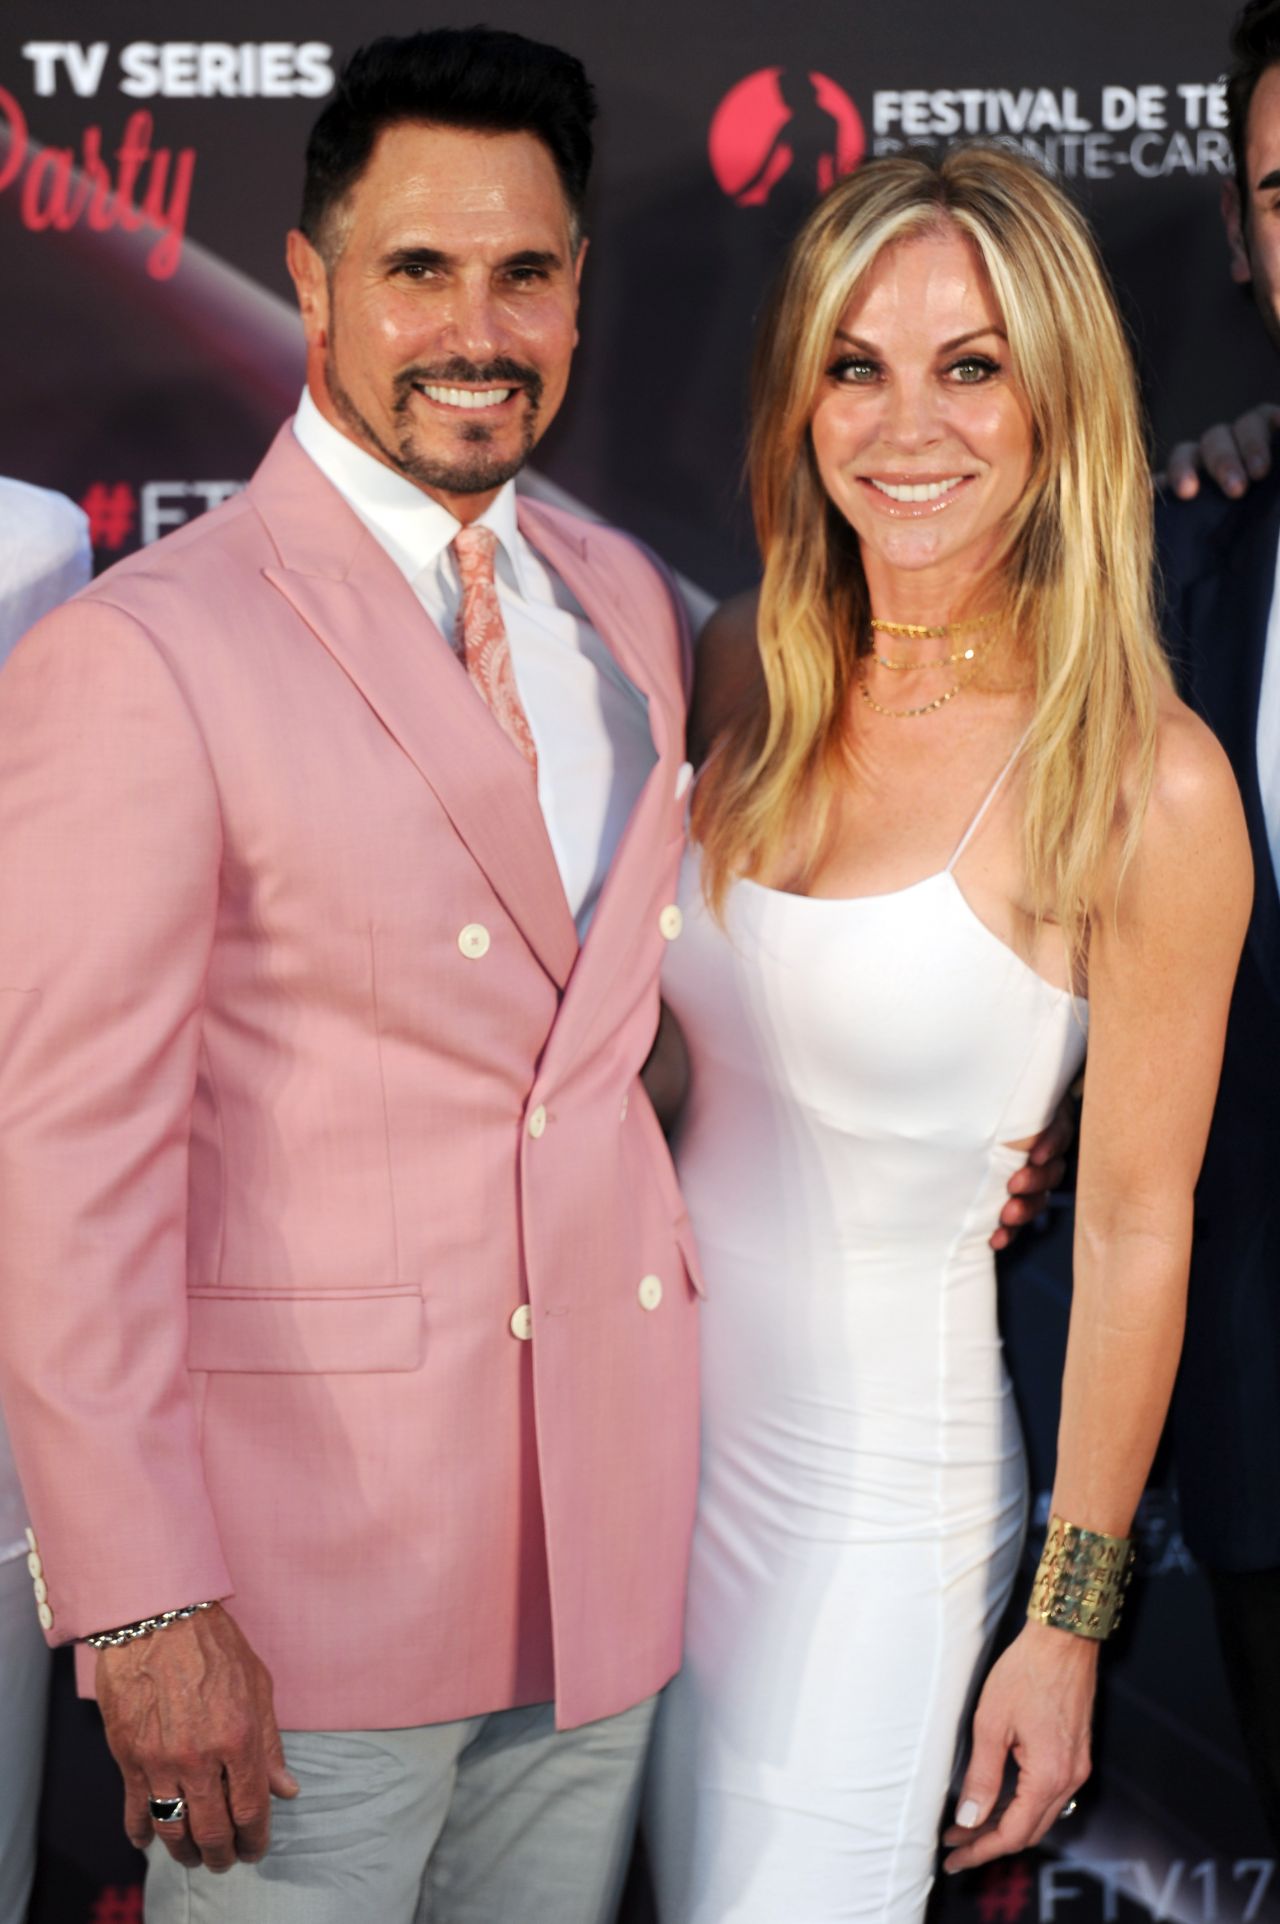 Cindy Ambuehl and Don Diamont, 